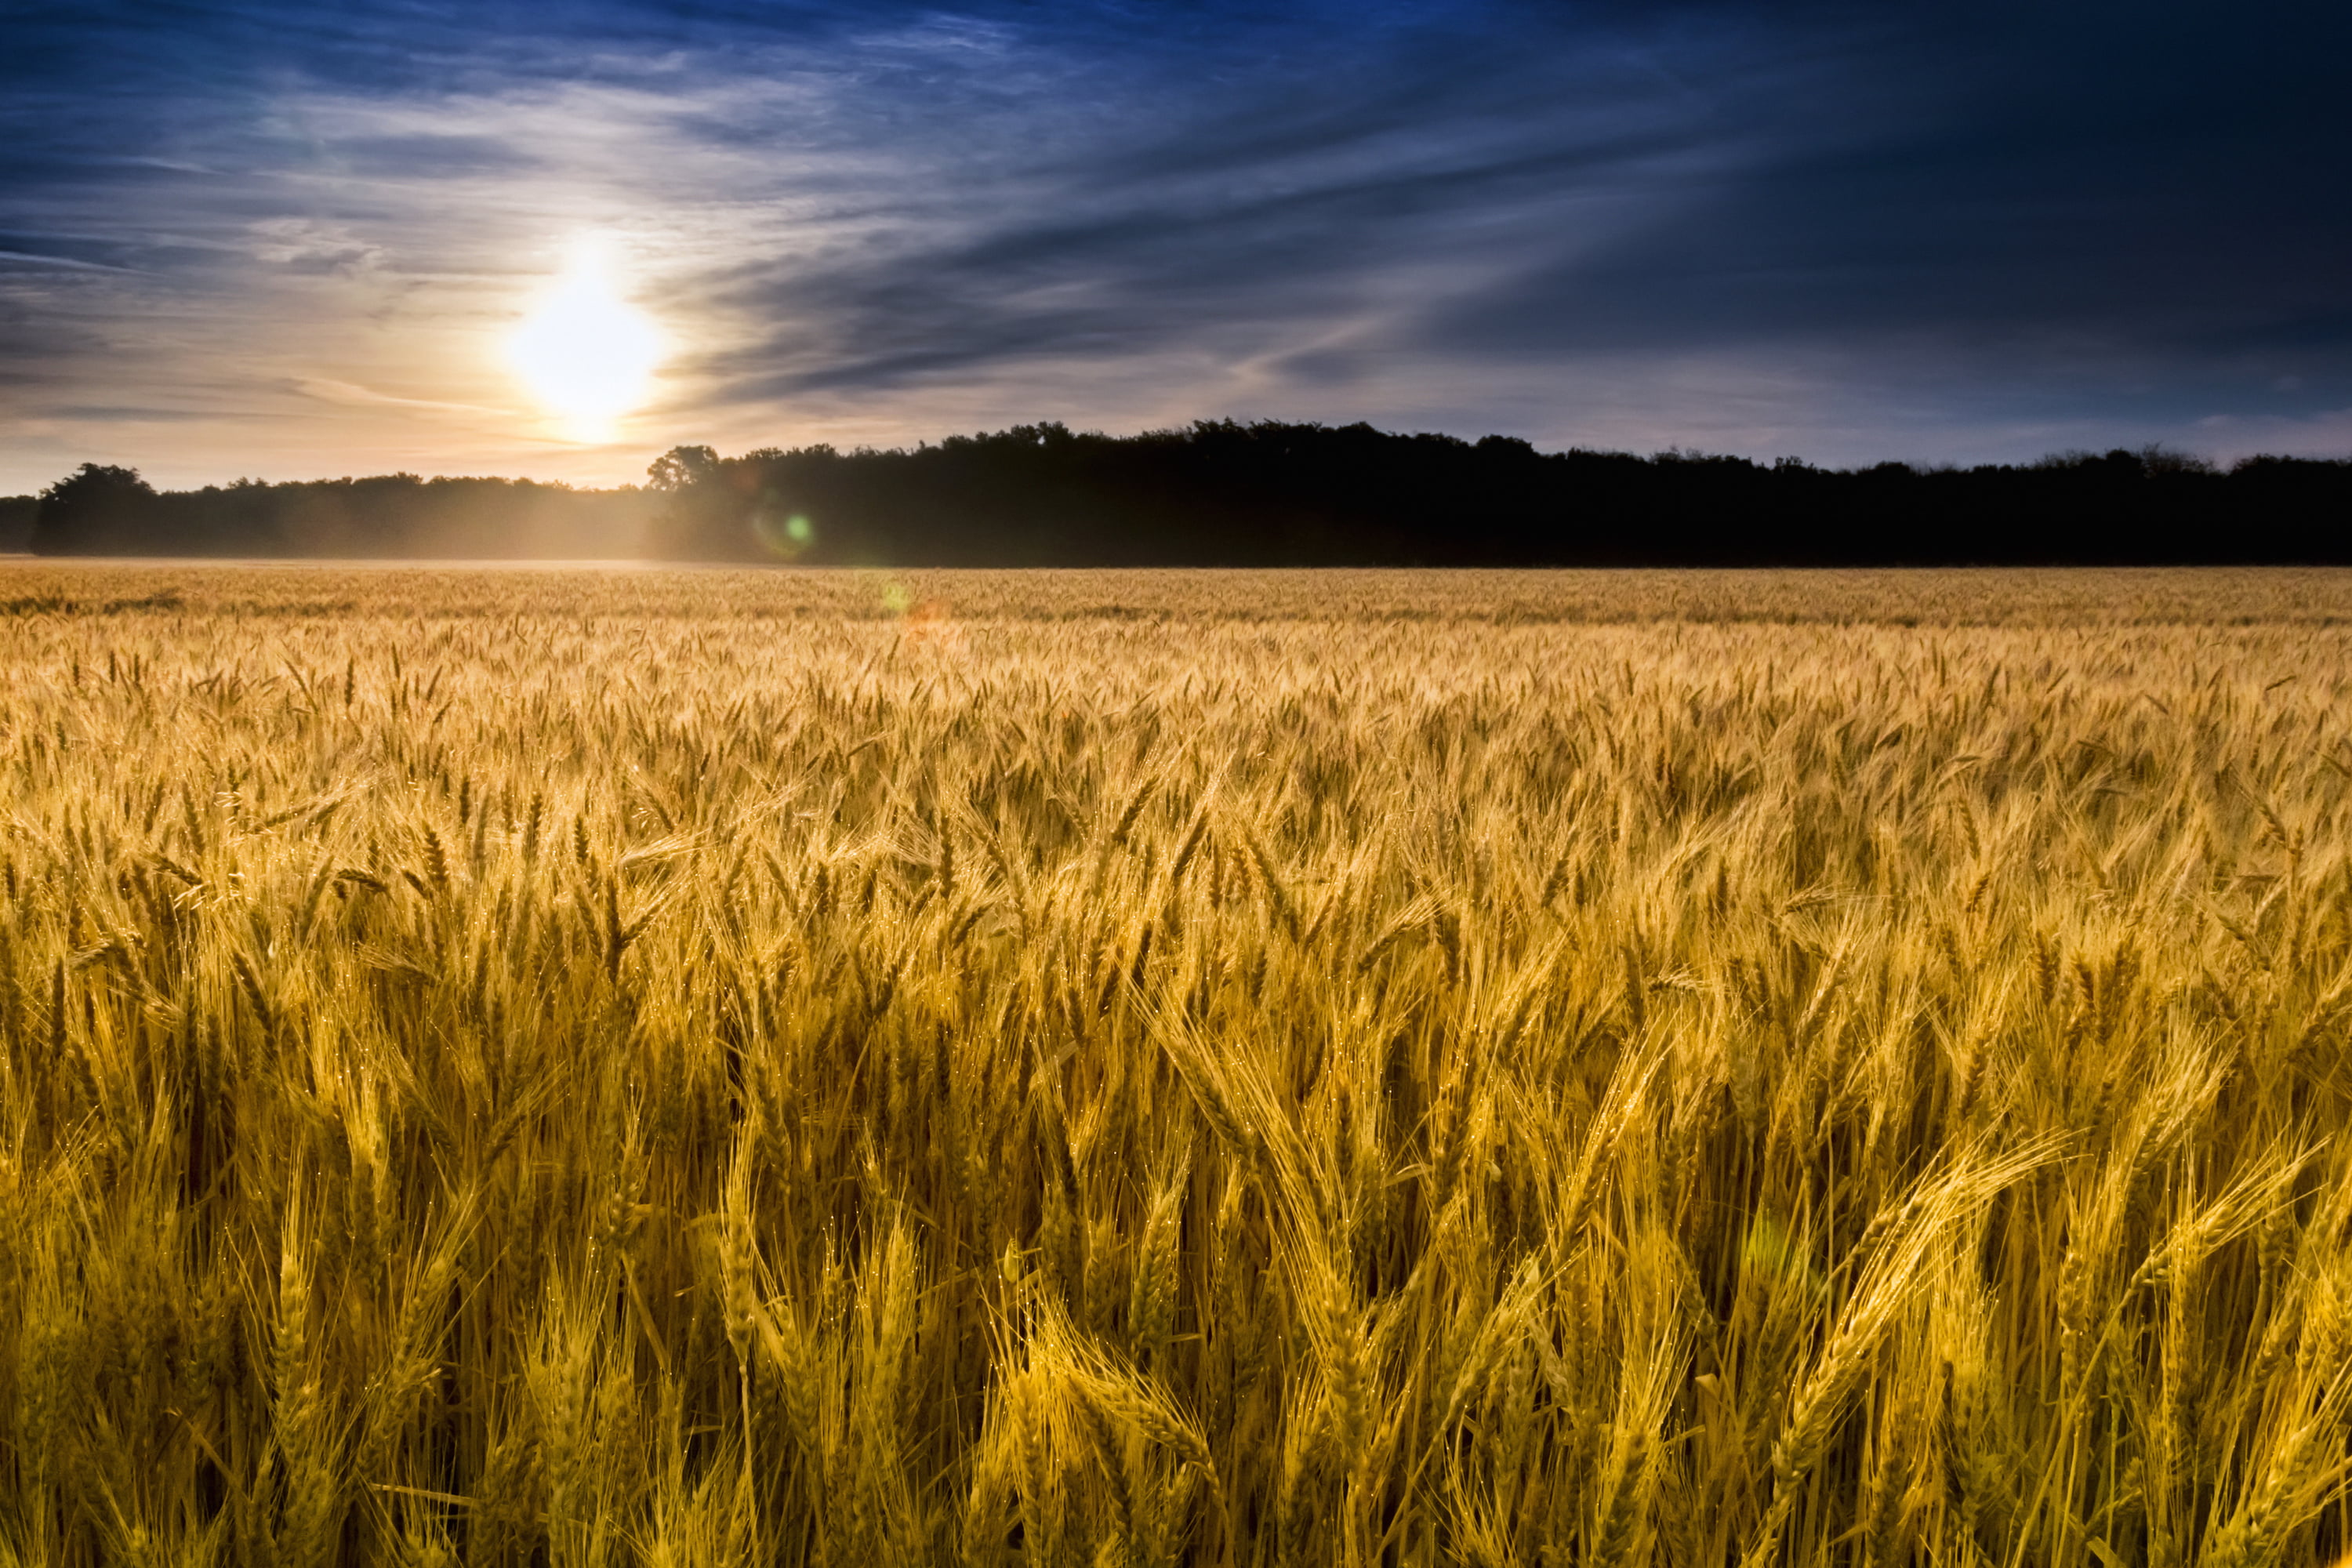 A Wheat Field in Kansas: New Beginnings of the Mind ...
